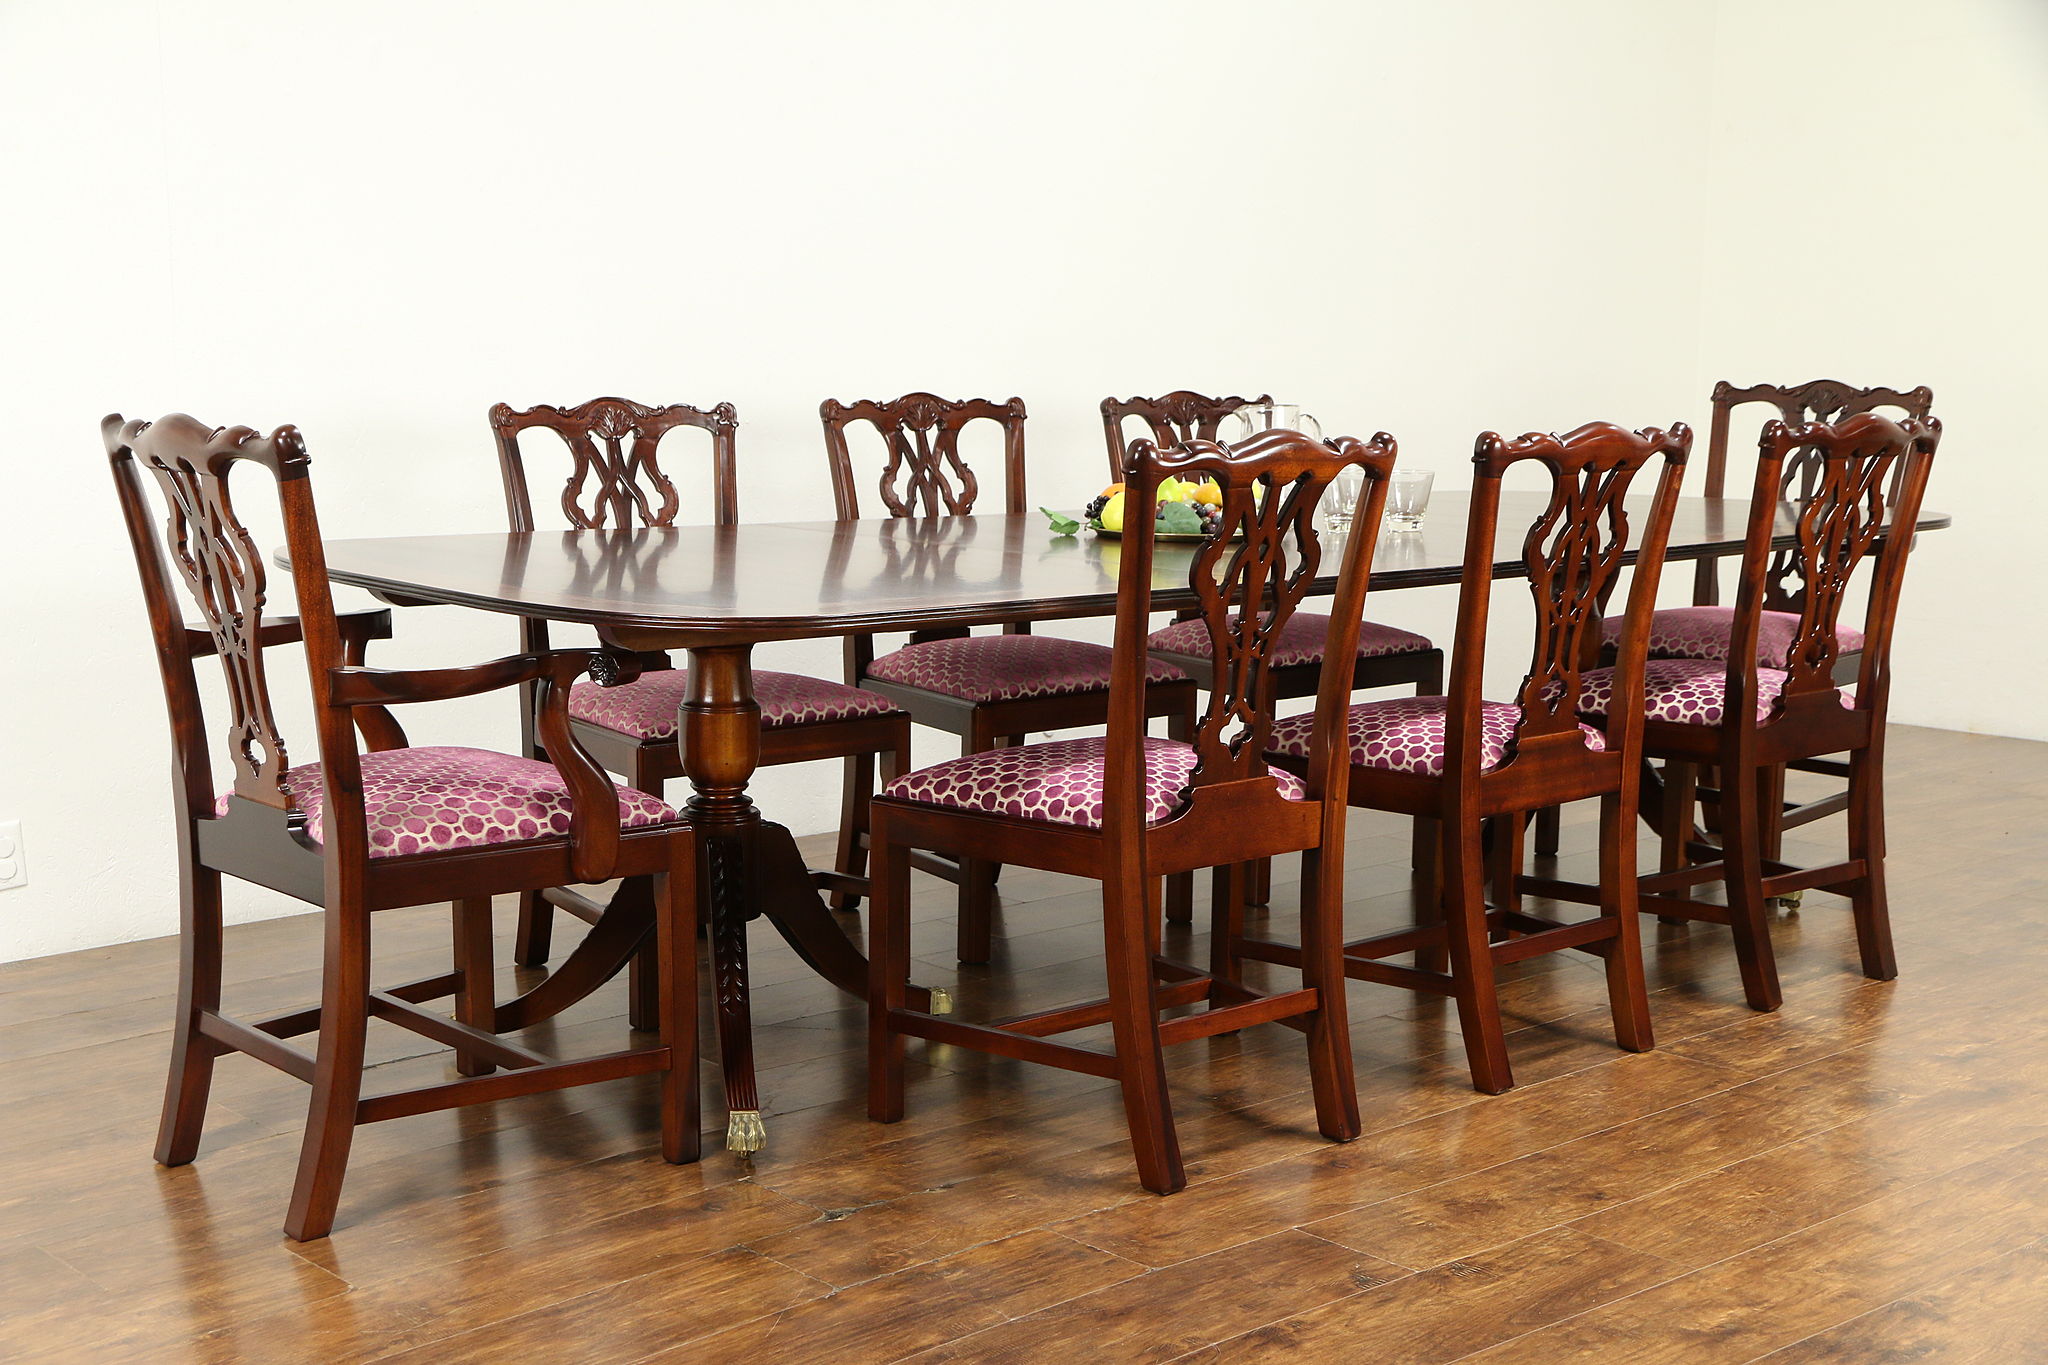 Sold Georgian Design Vintage Dining Set Banded 10 Table 8 Chairs 32071 Harp Gallery Antiques Furniture